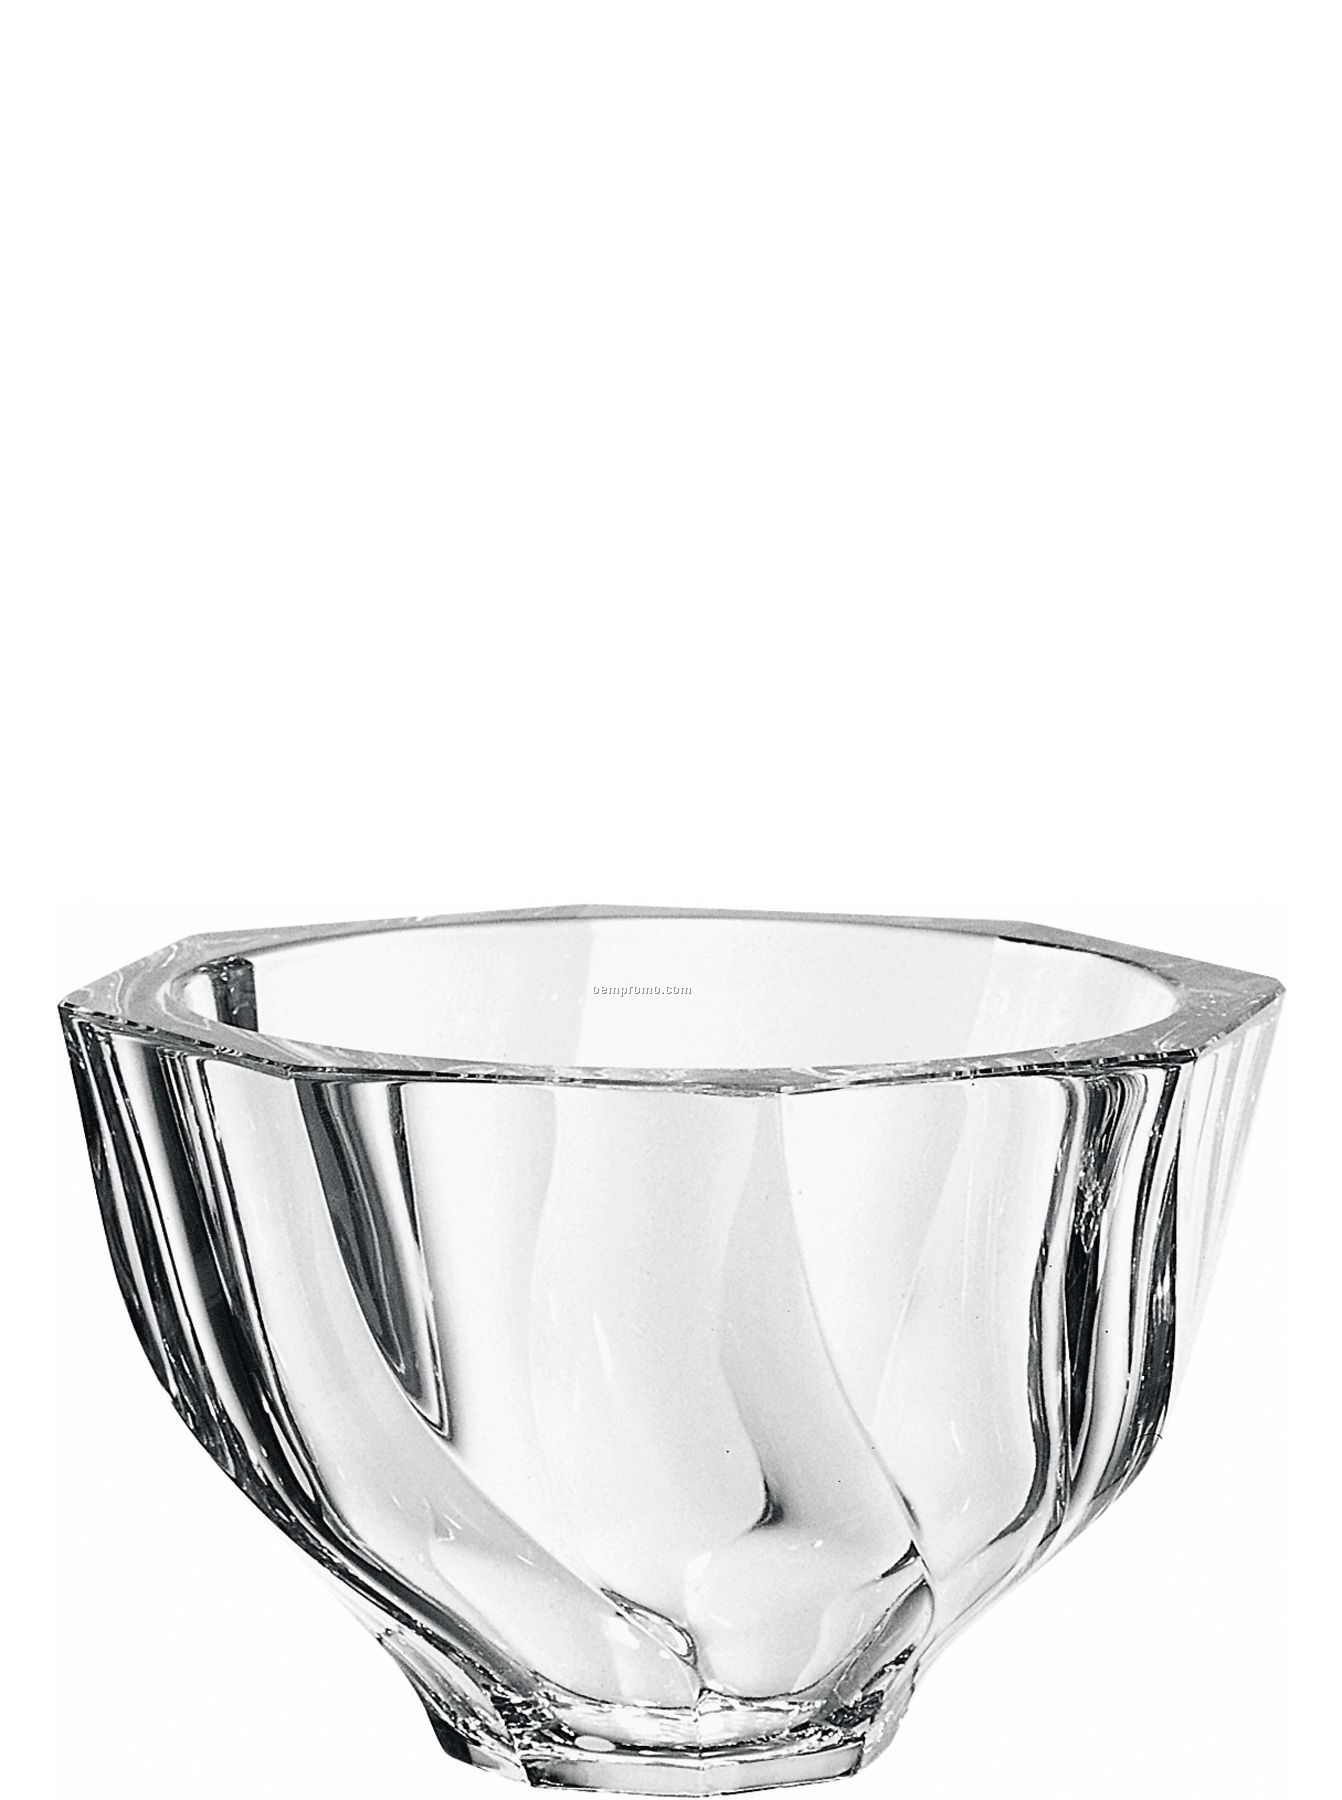 Residence Crystal Biased Cut Bowl By Olle Alberius (4 1/8"X6 1/4")